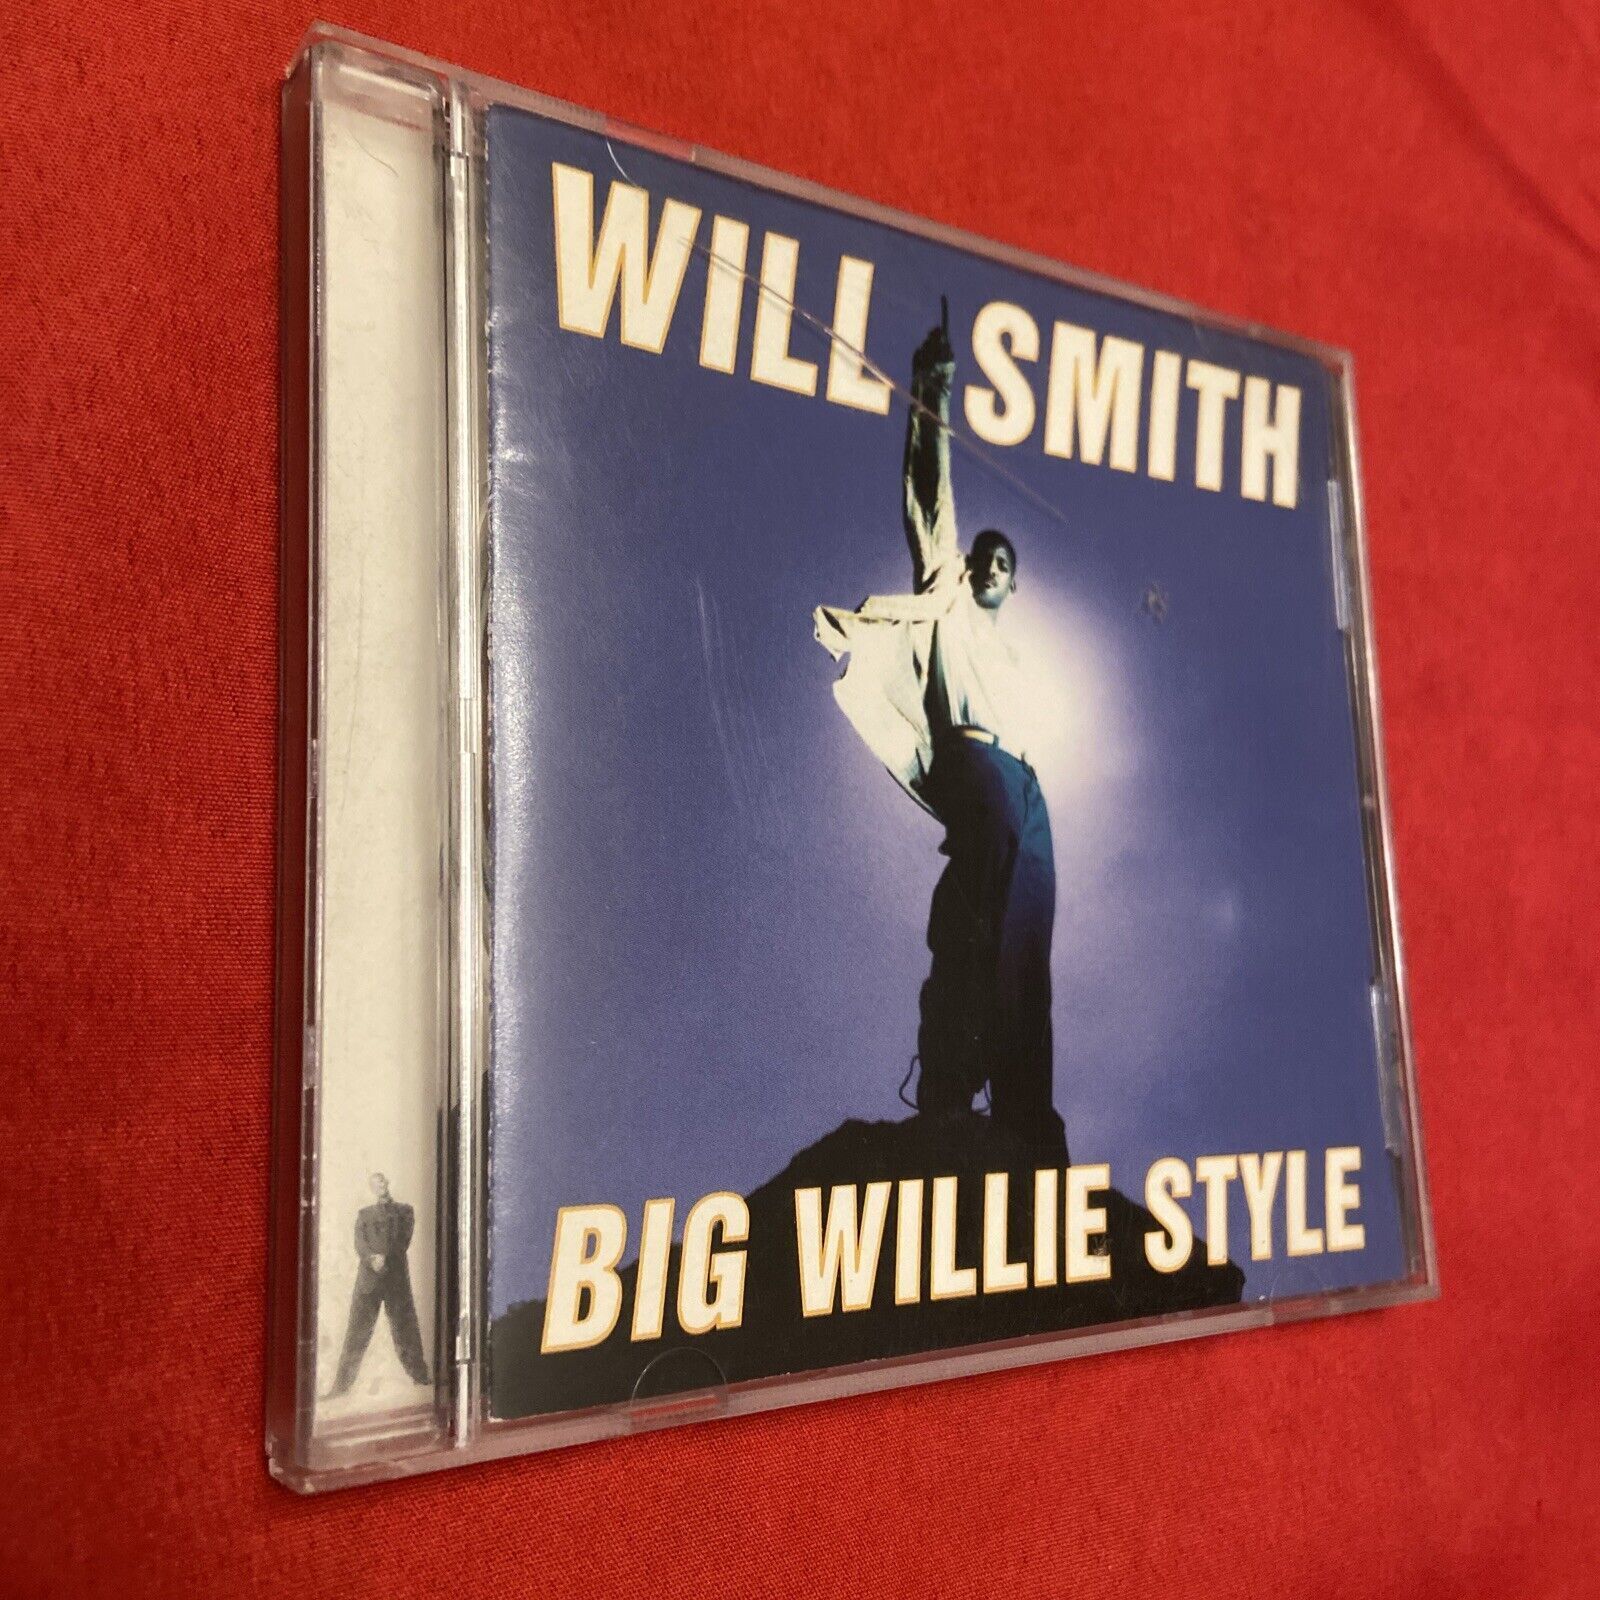 Rare 1997 Will Smith CD Album: Big Willie Style As Pictured